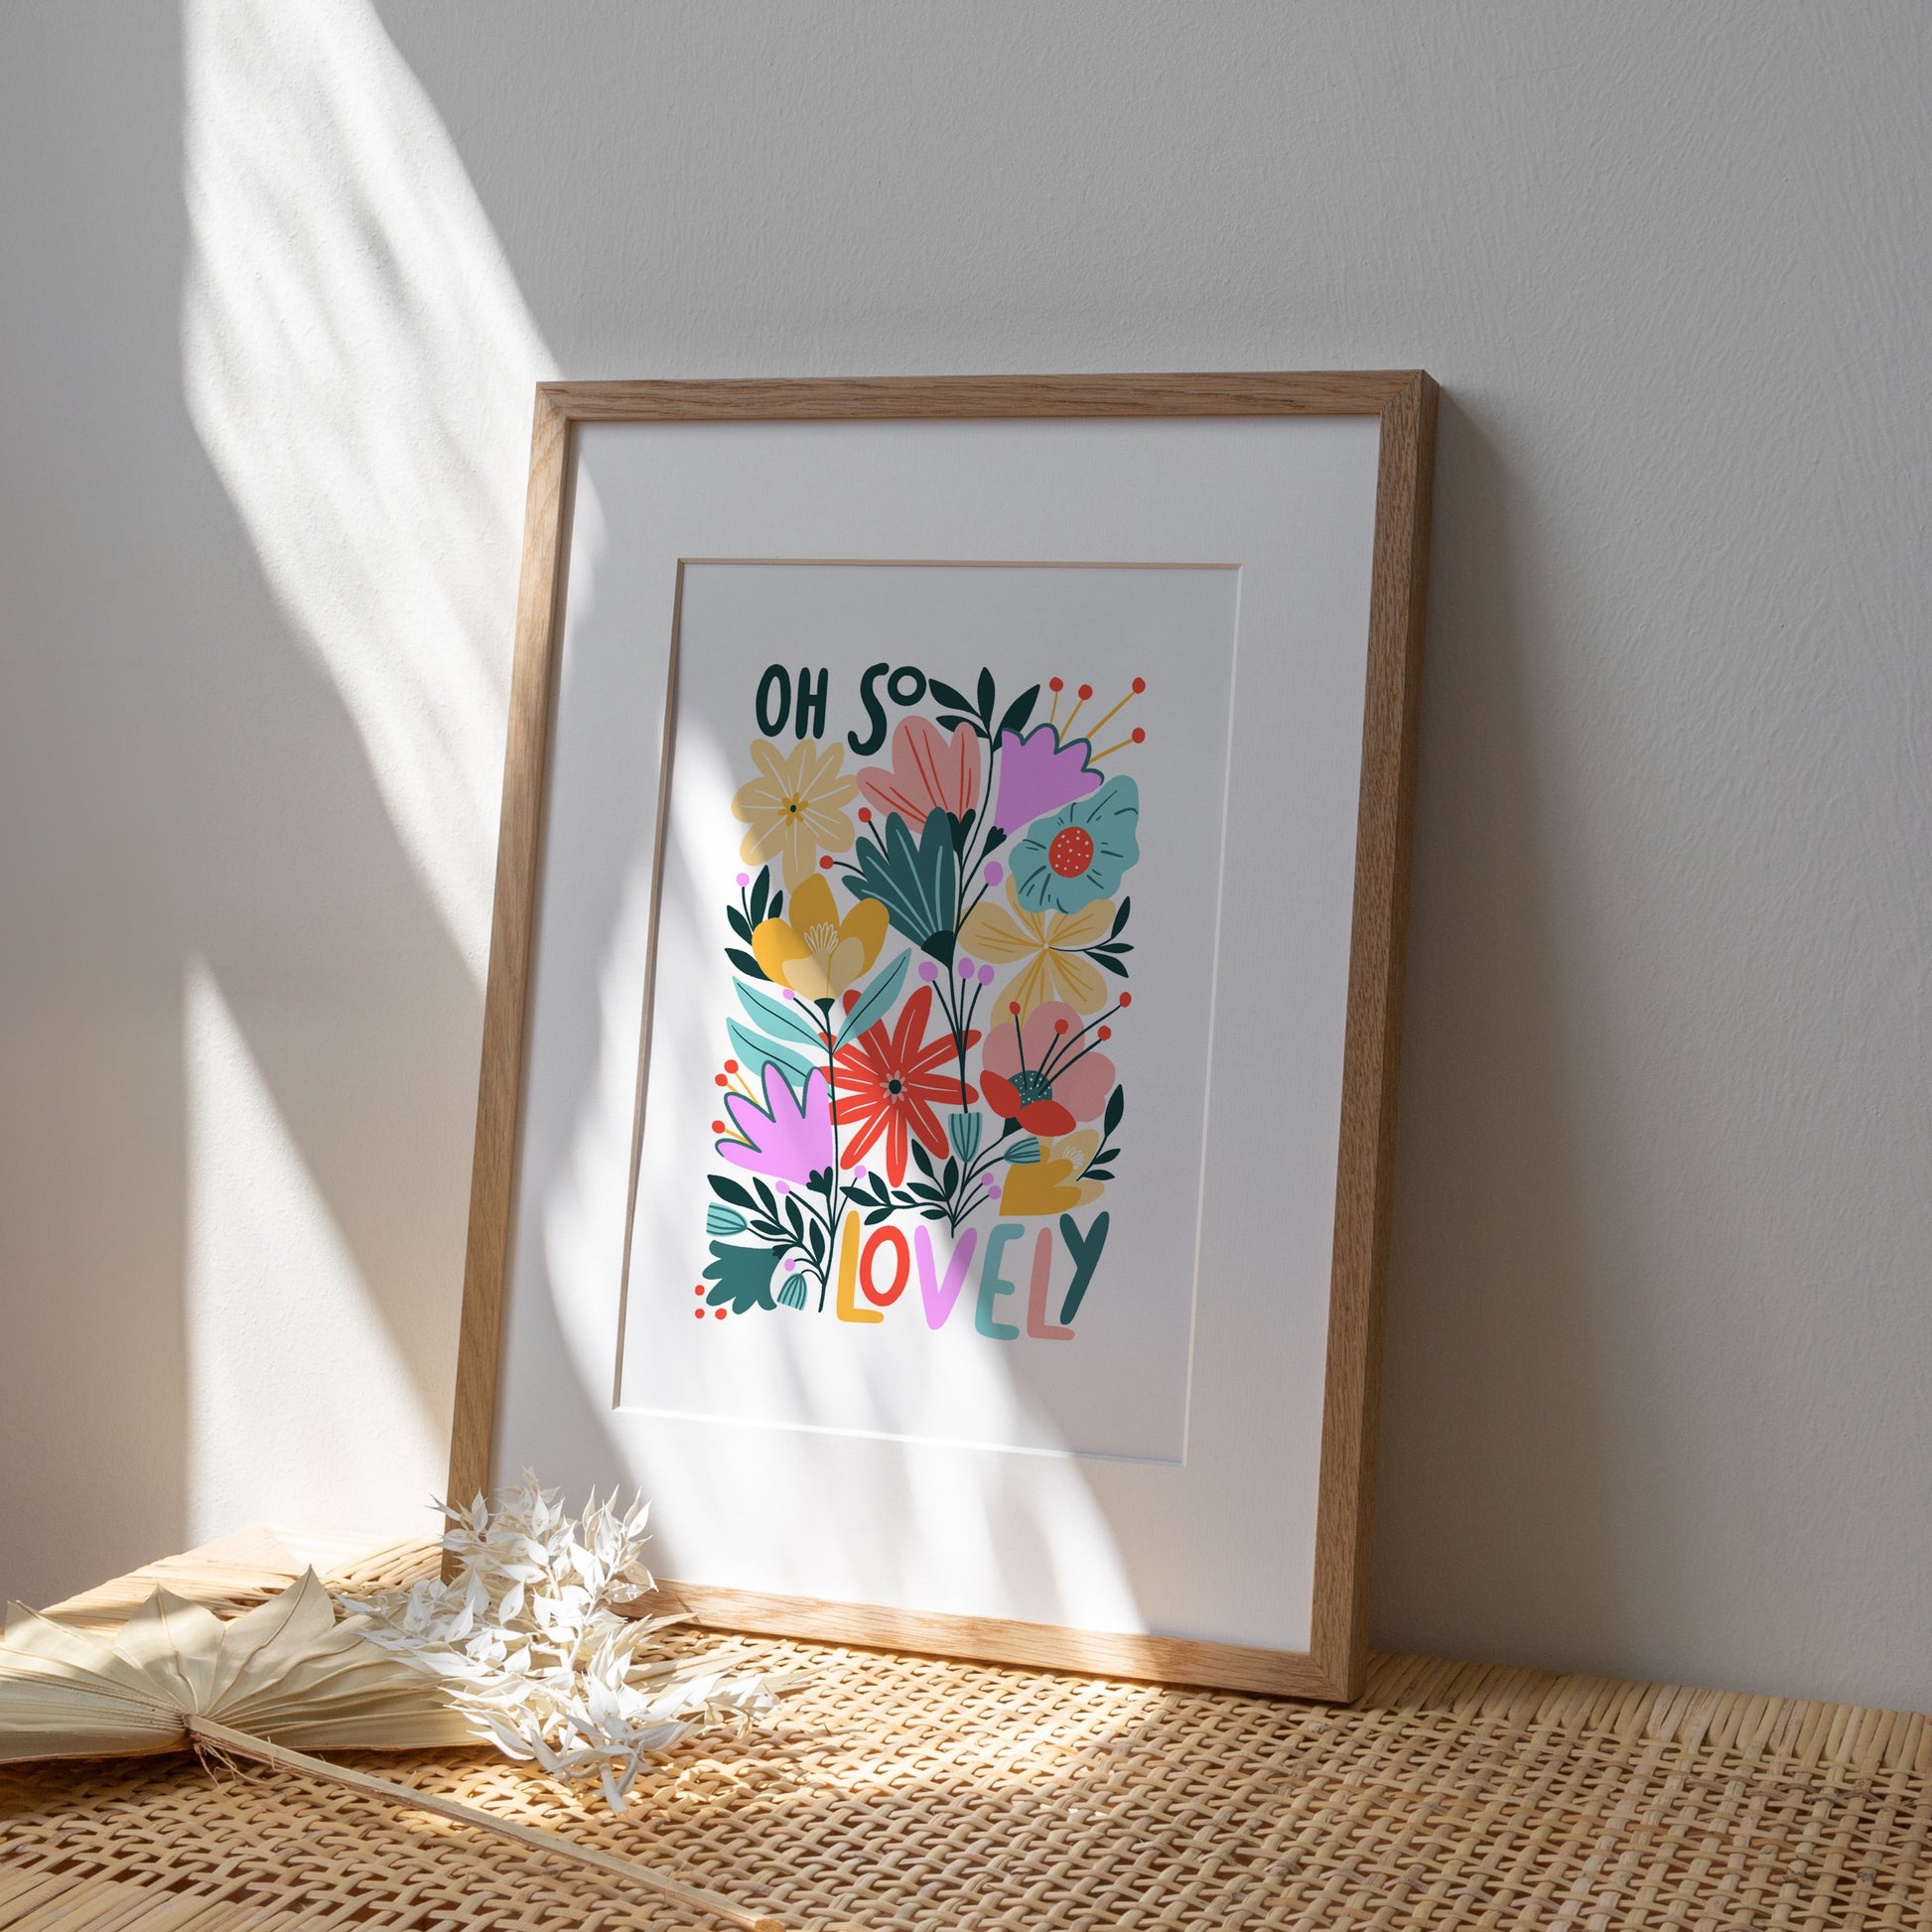 oh so lovely art print, with lots of colourful florals and leaves